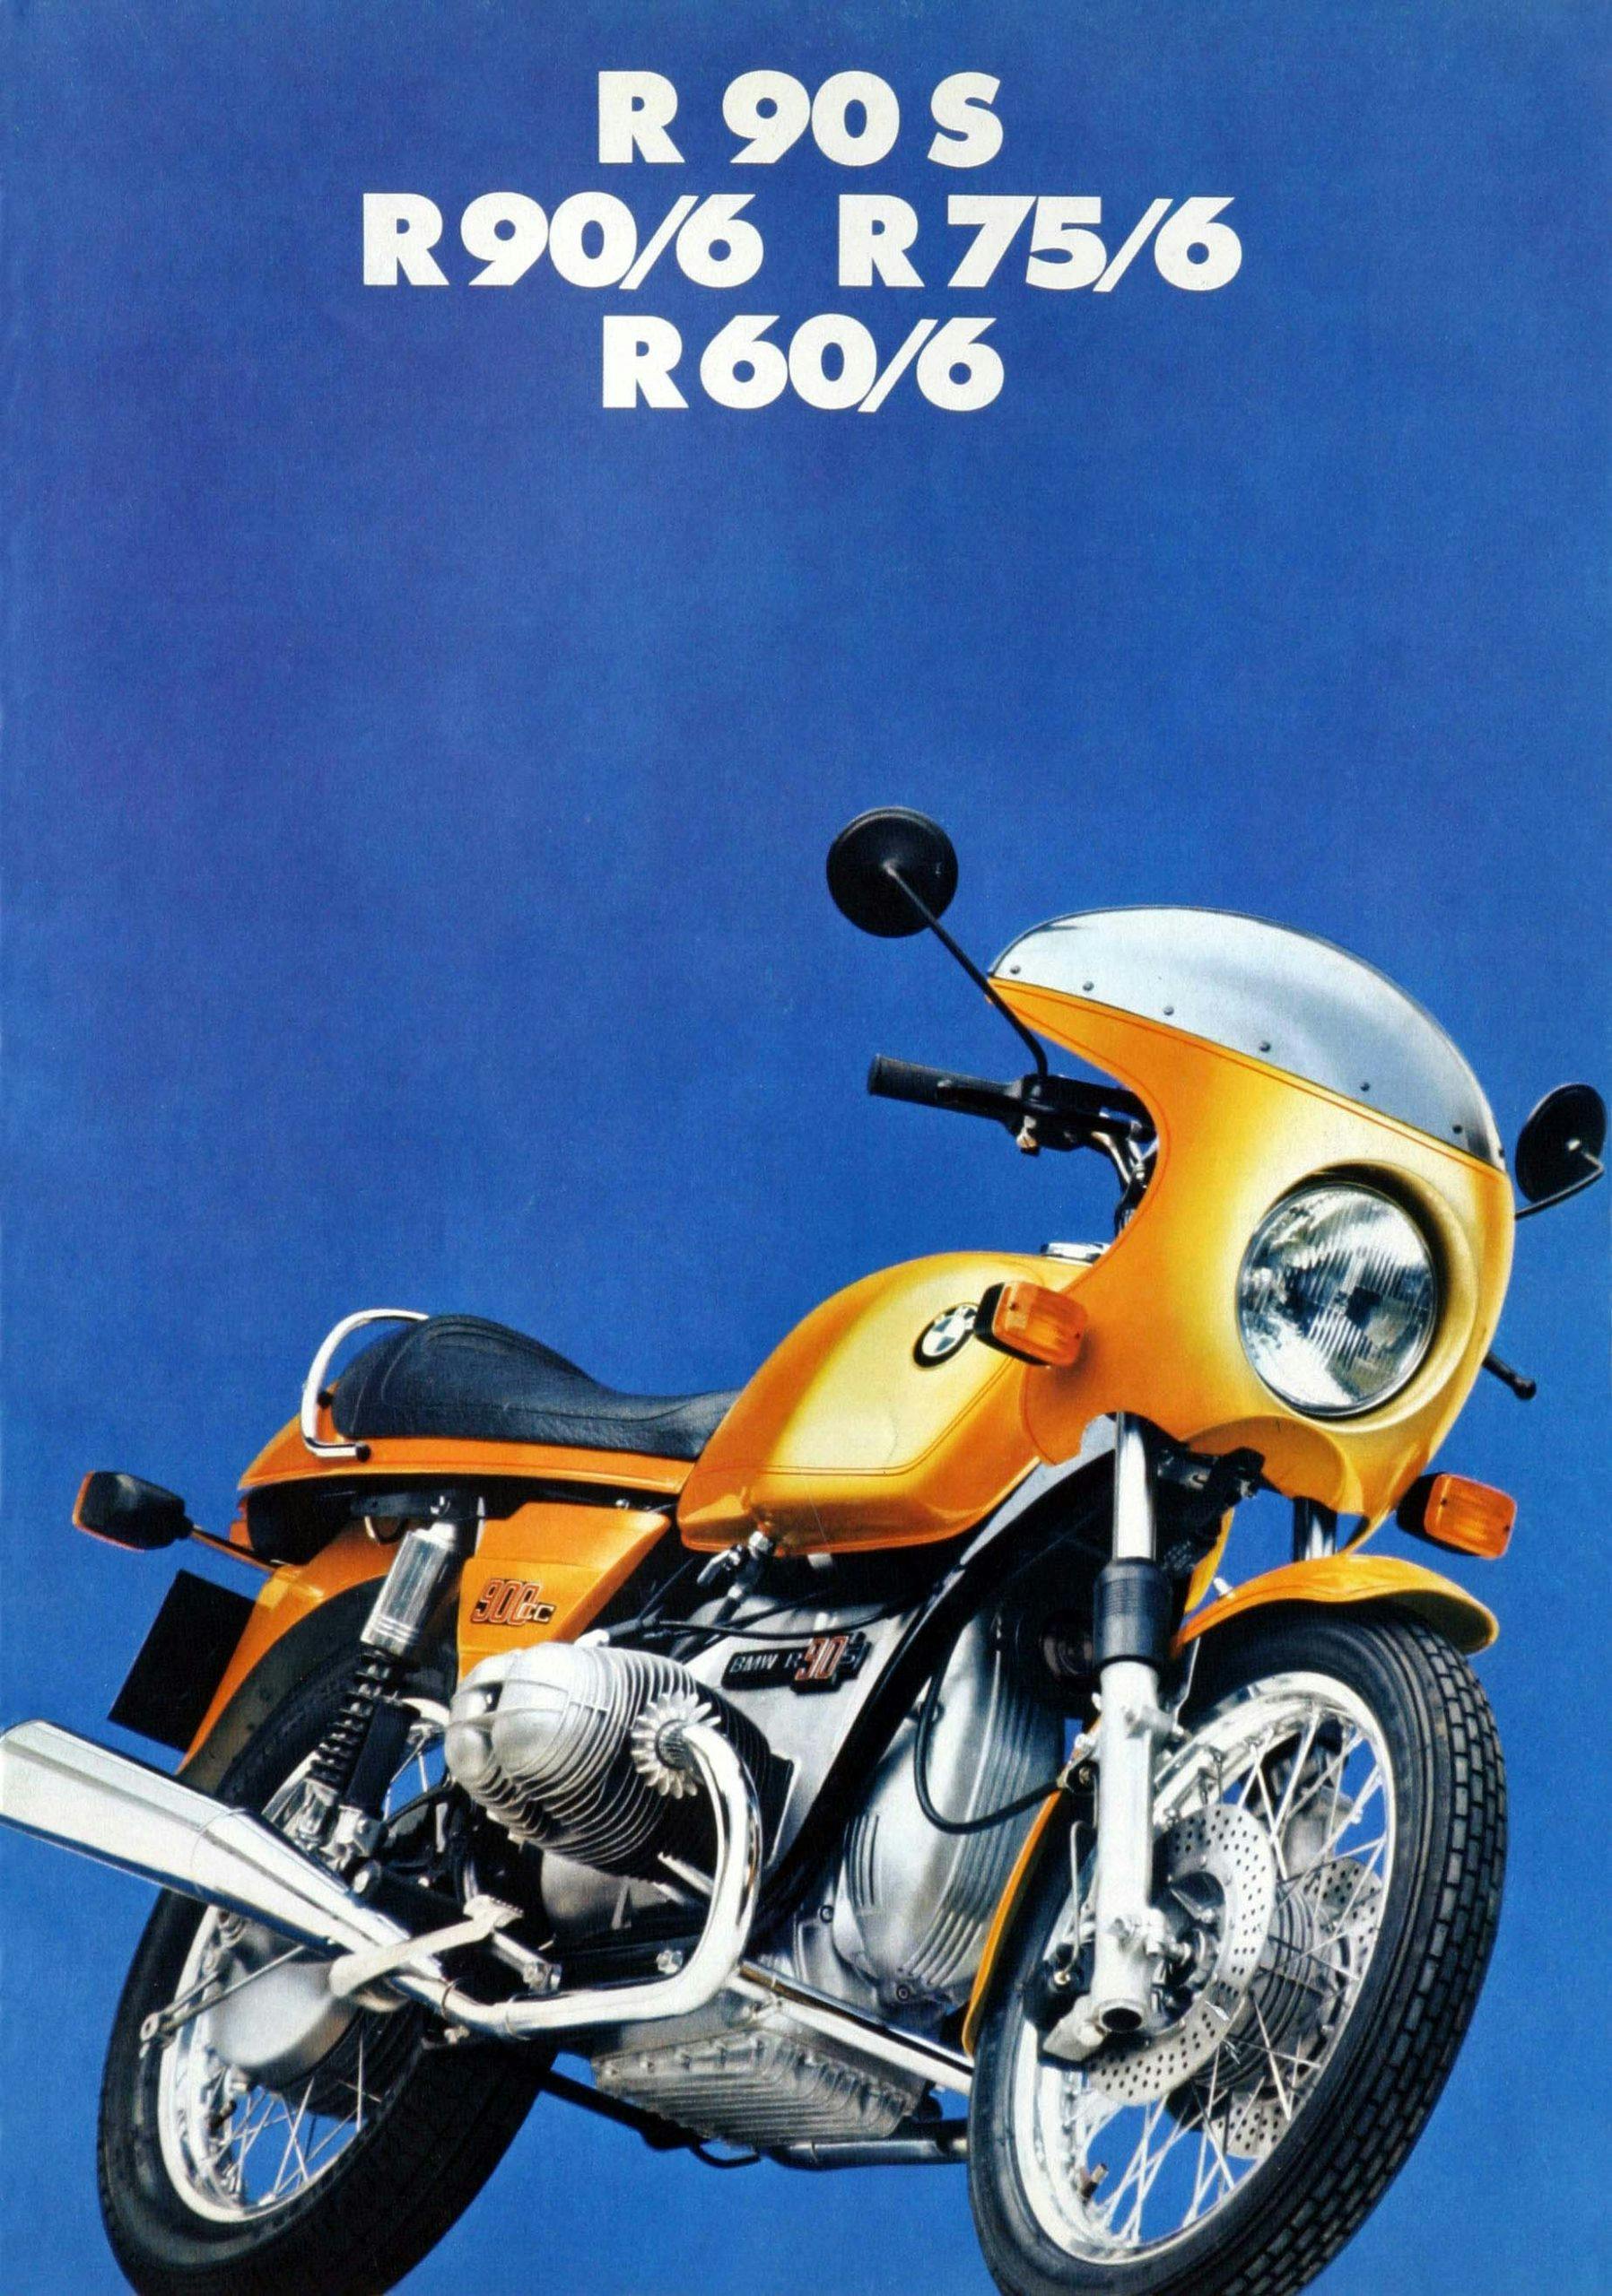 BMW R90S motorcycle